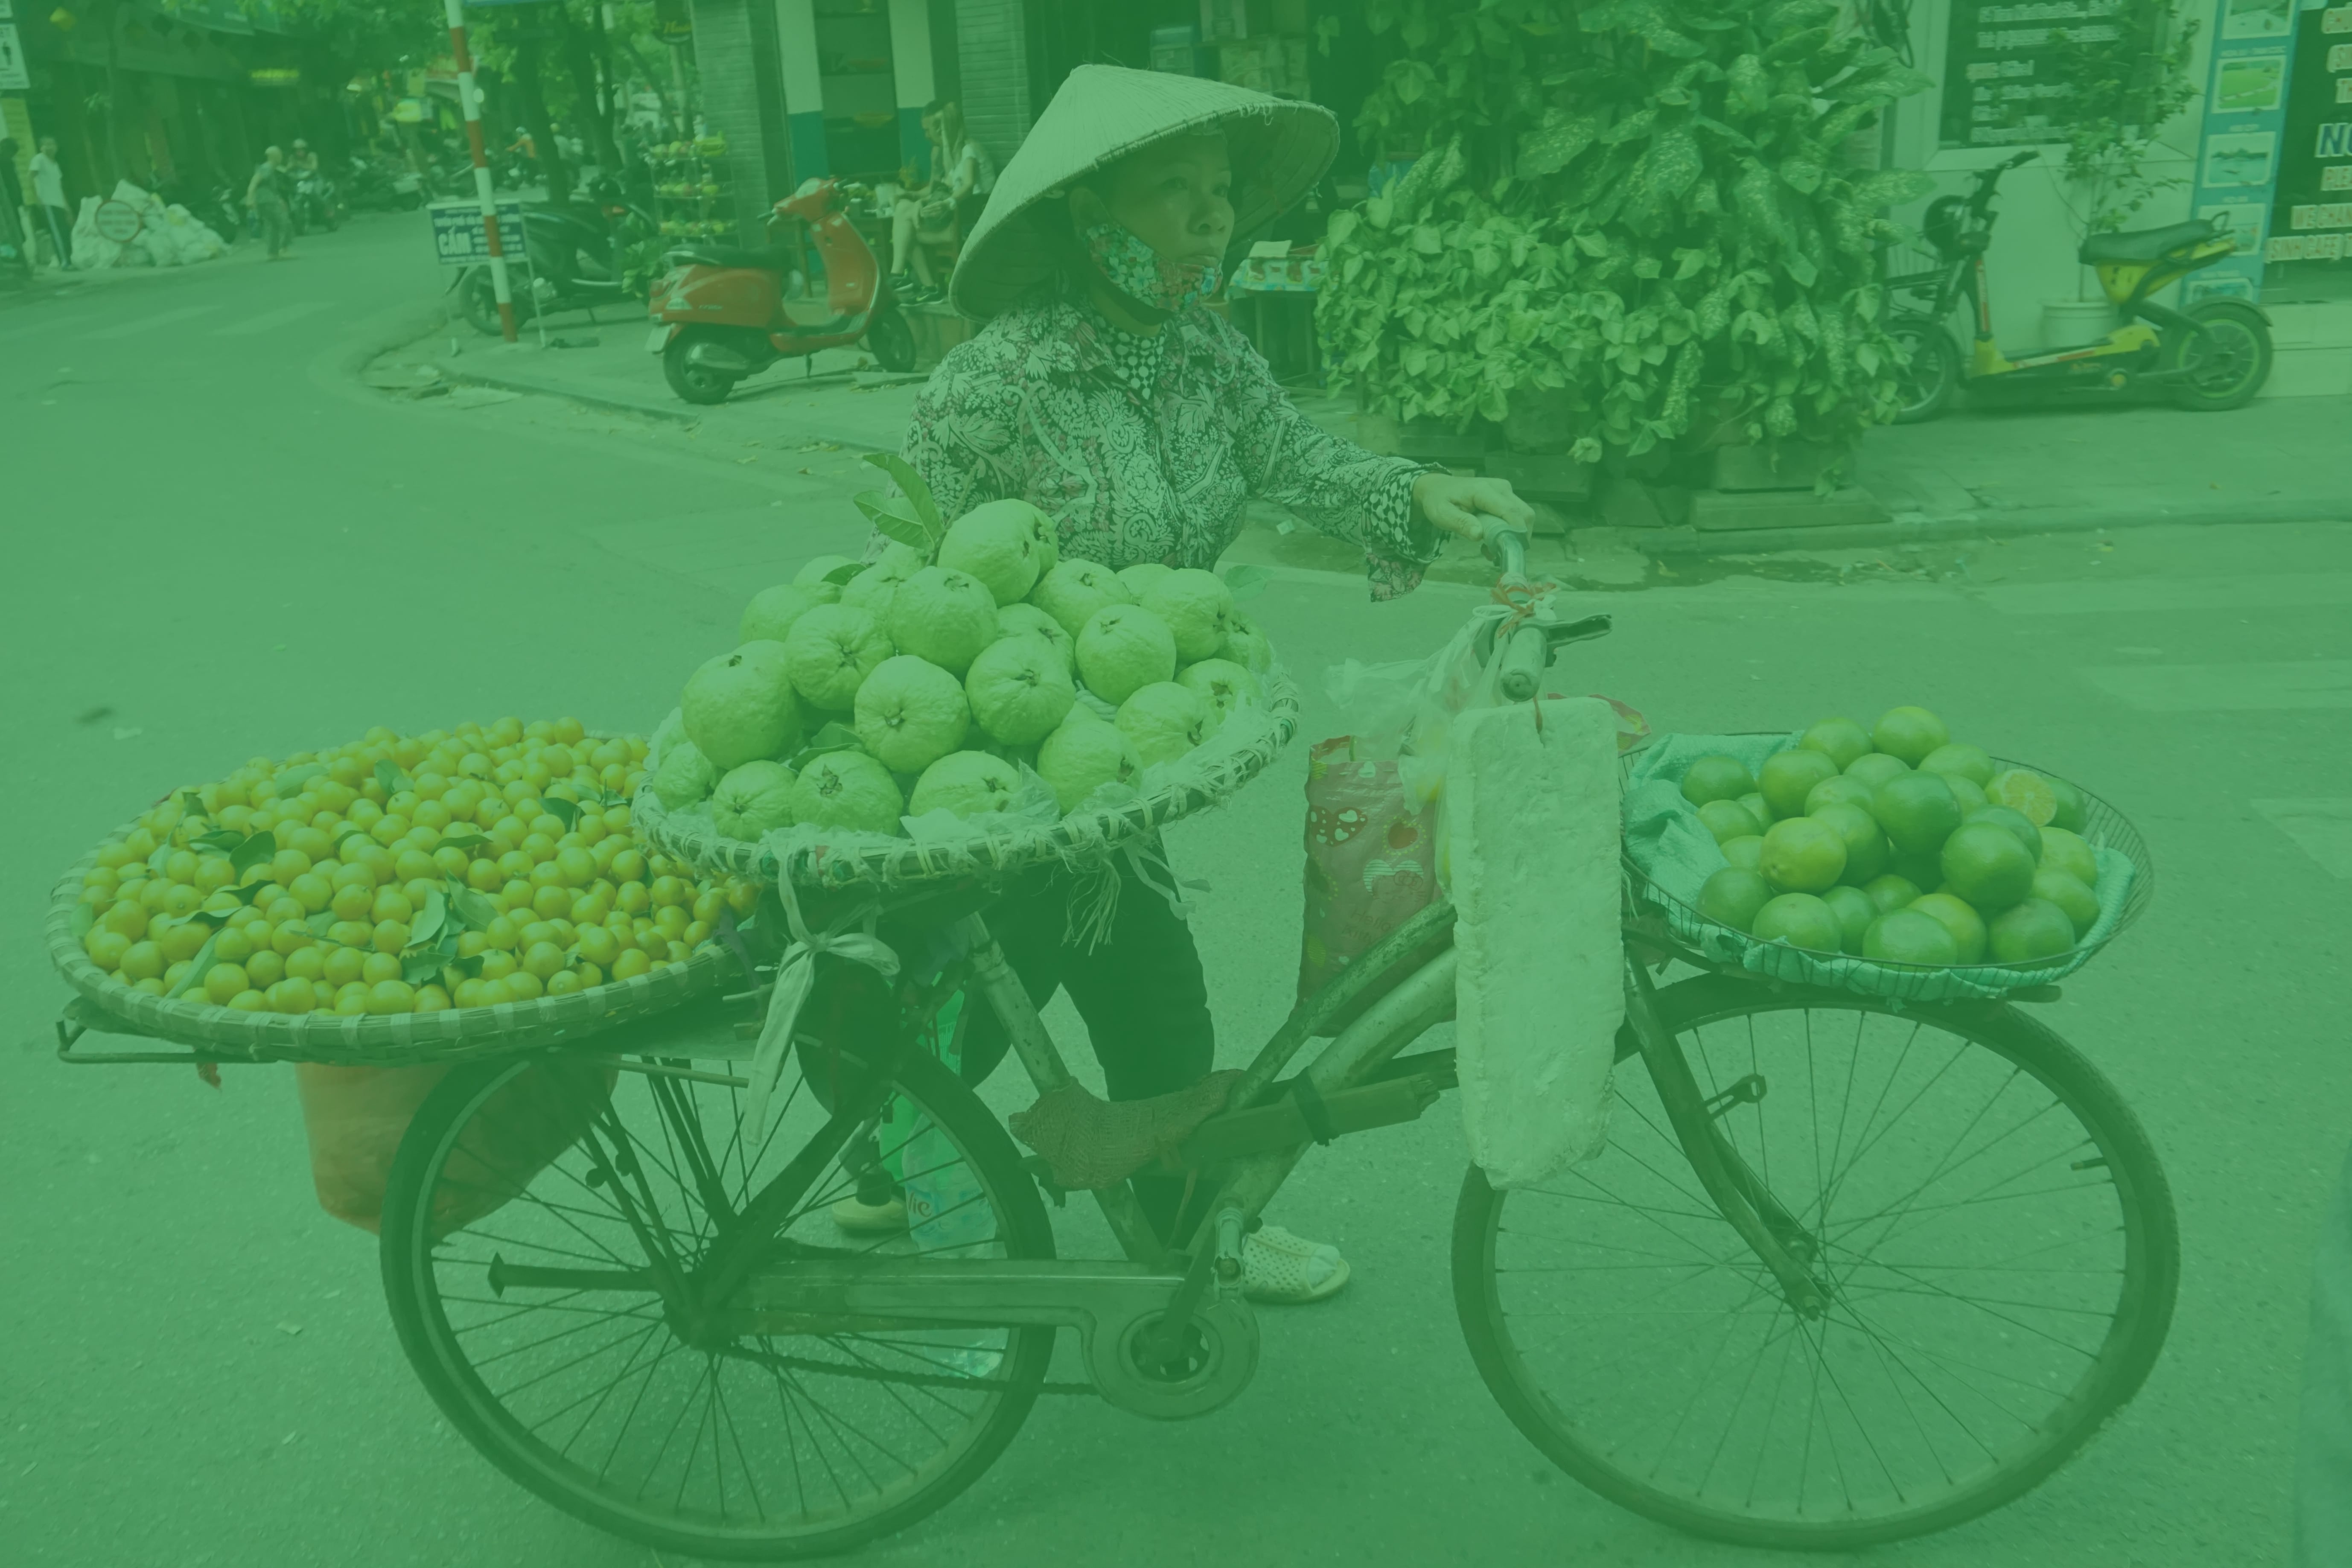 Woman rides a bike with a lot of food on it